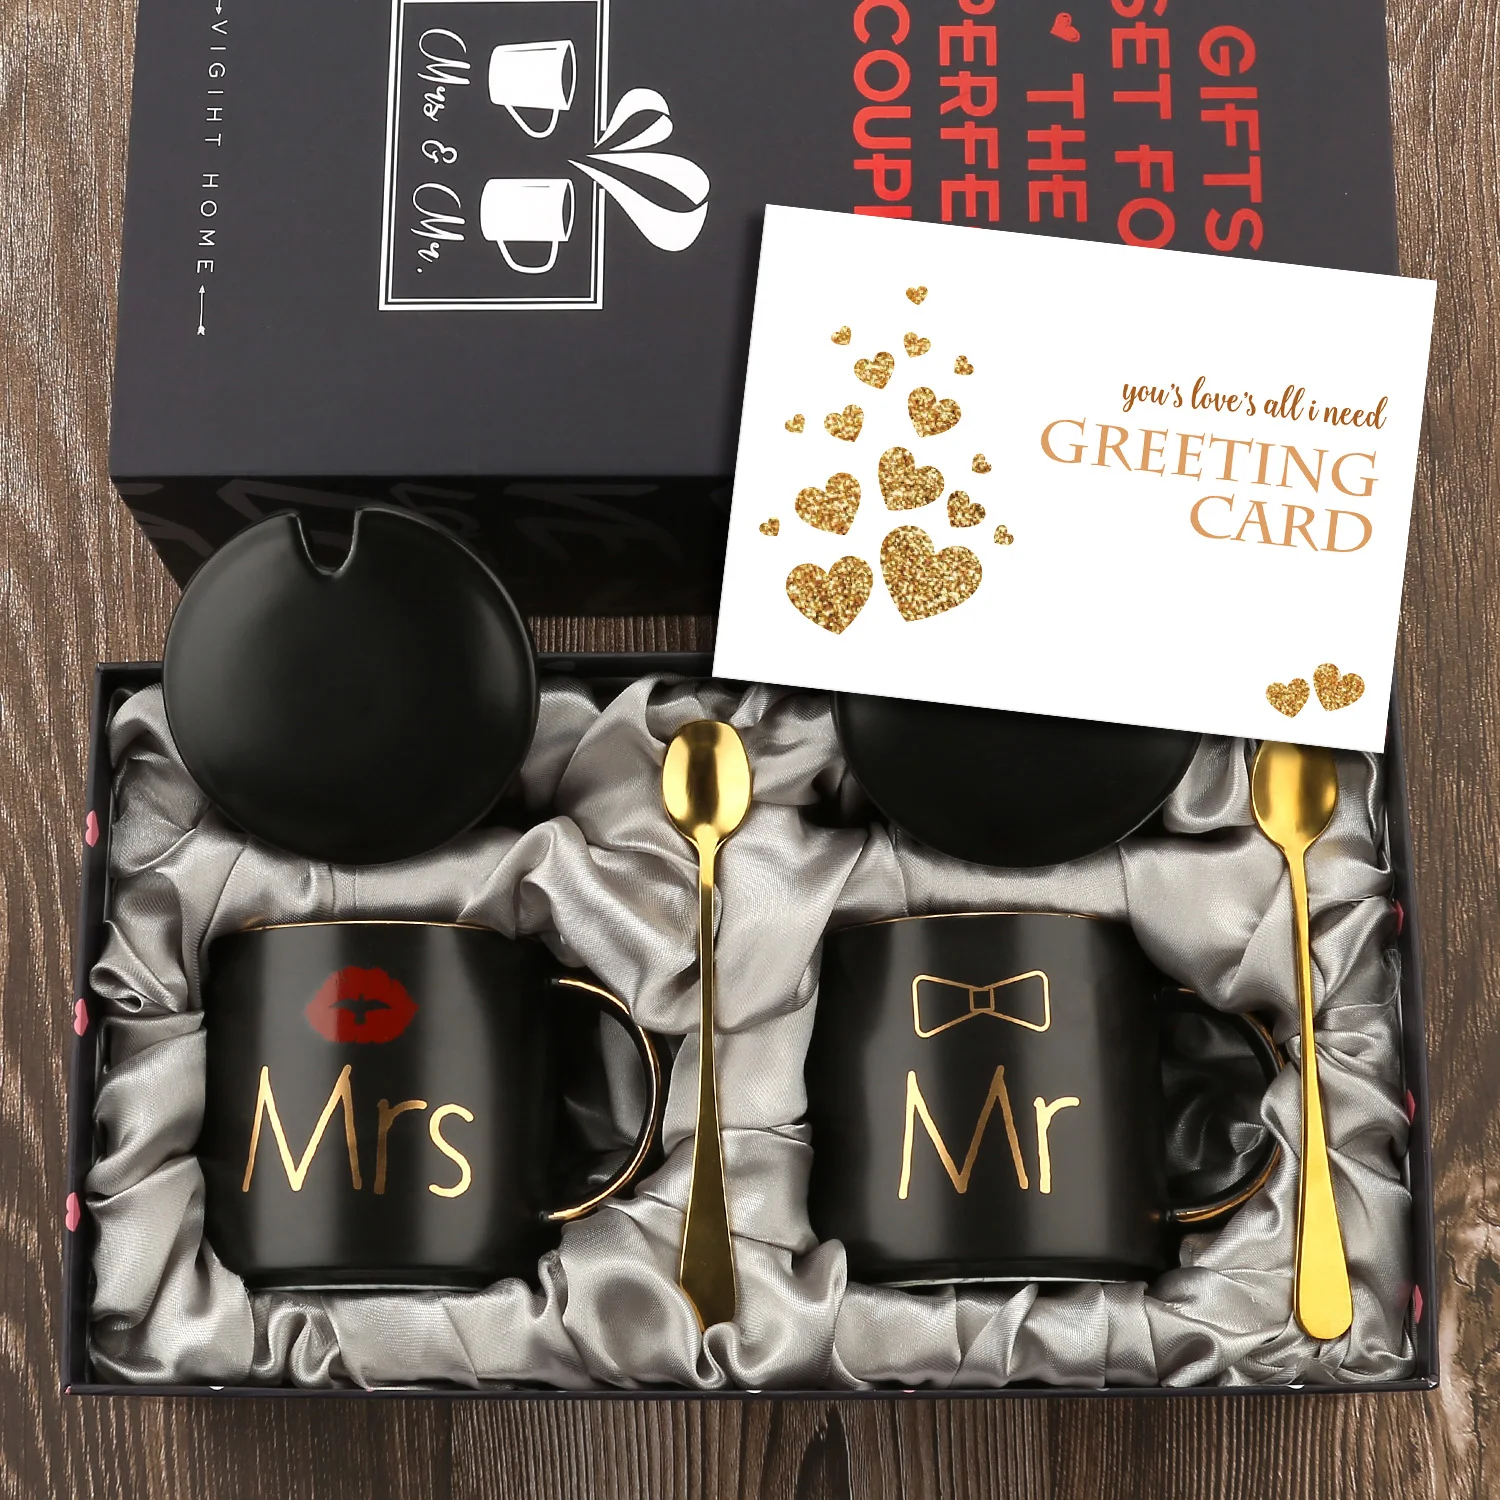 Mr and Mrs Coffee Mugs Cups Gift-Set for Engagement Wedding 